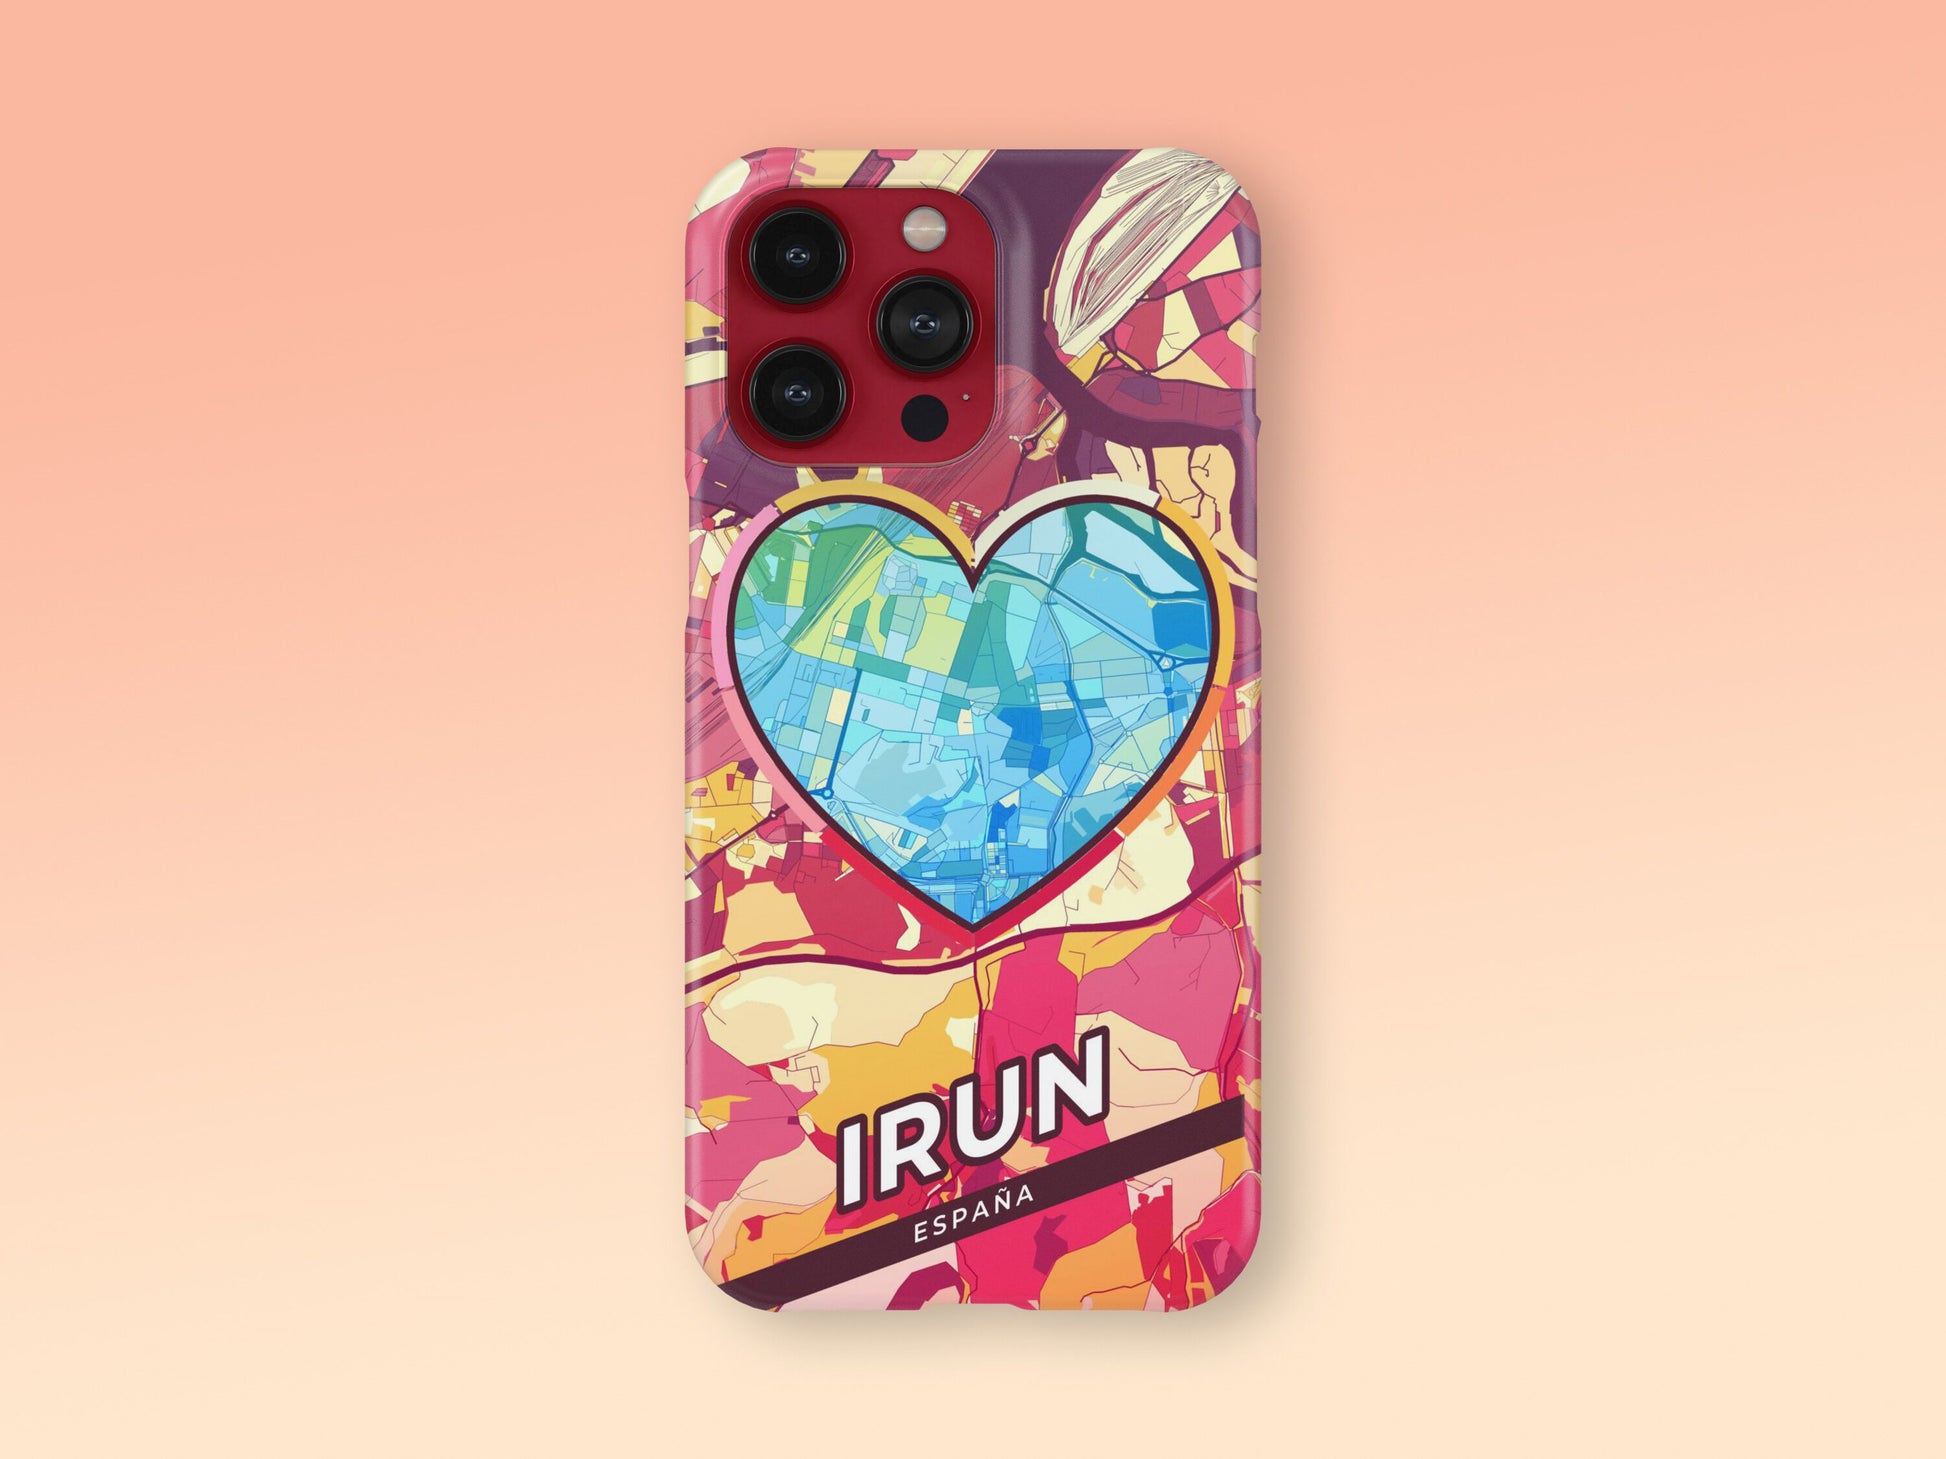 Irun Spain slim phone case with colorful icon. Birthday, wedding or housewarming gift. Couple match cases. 2